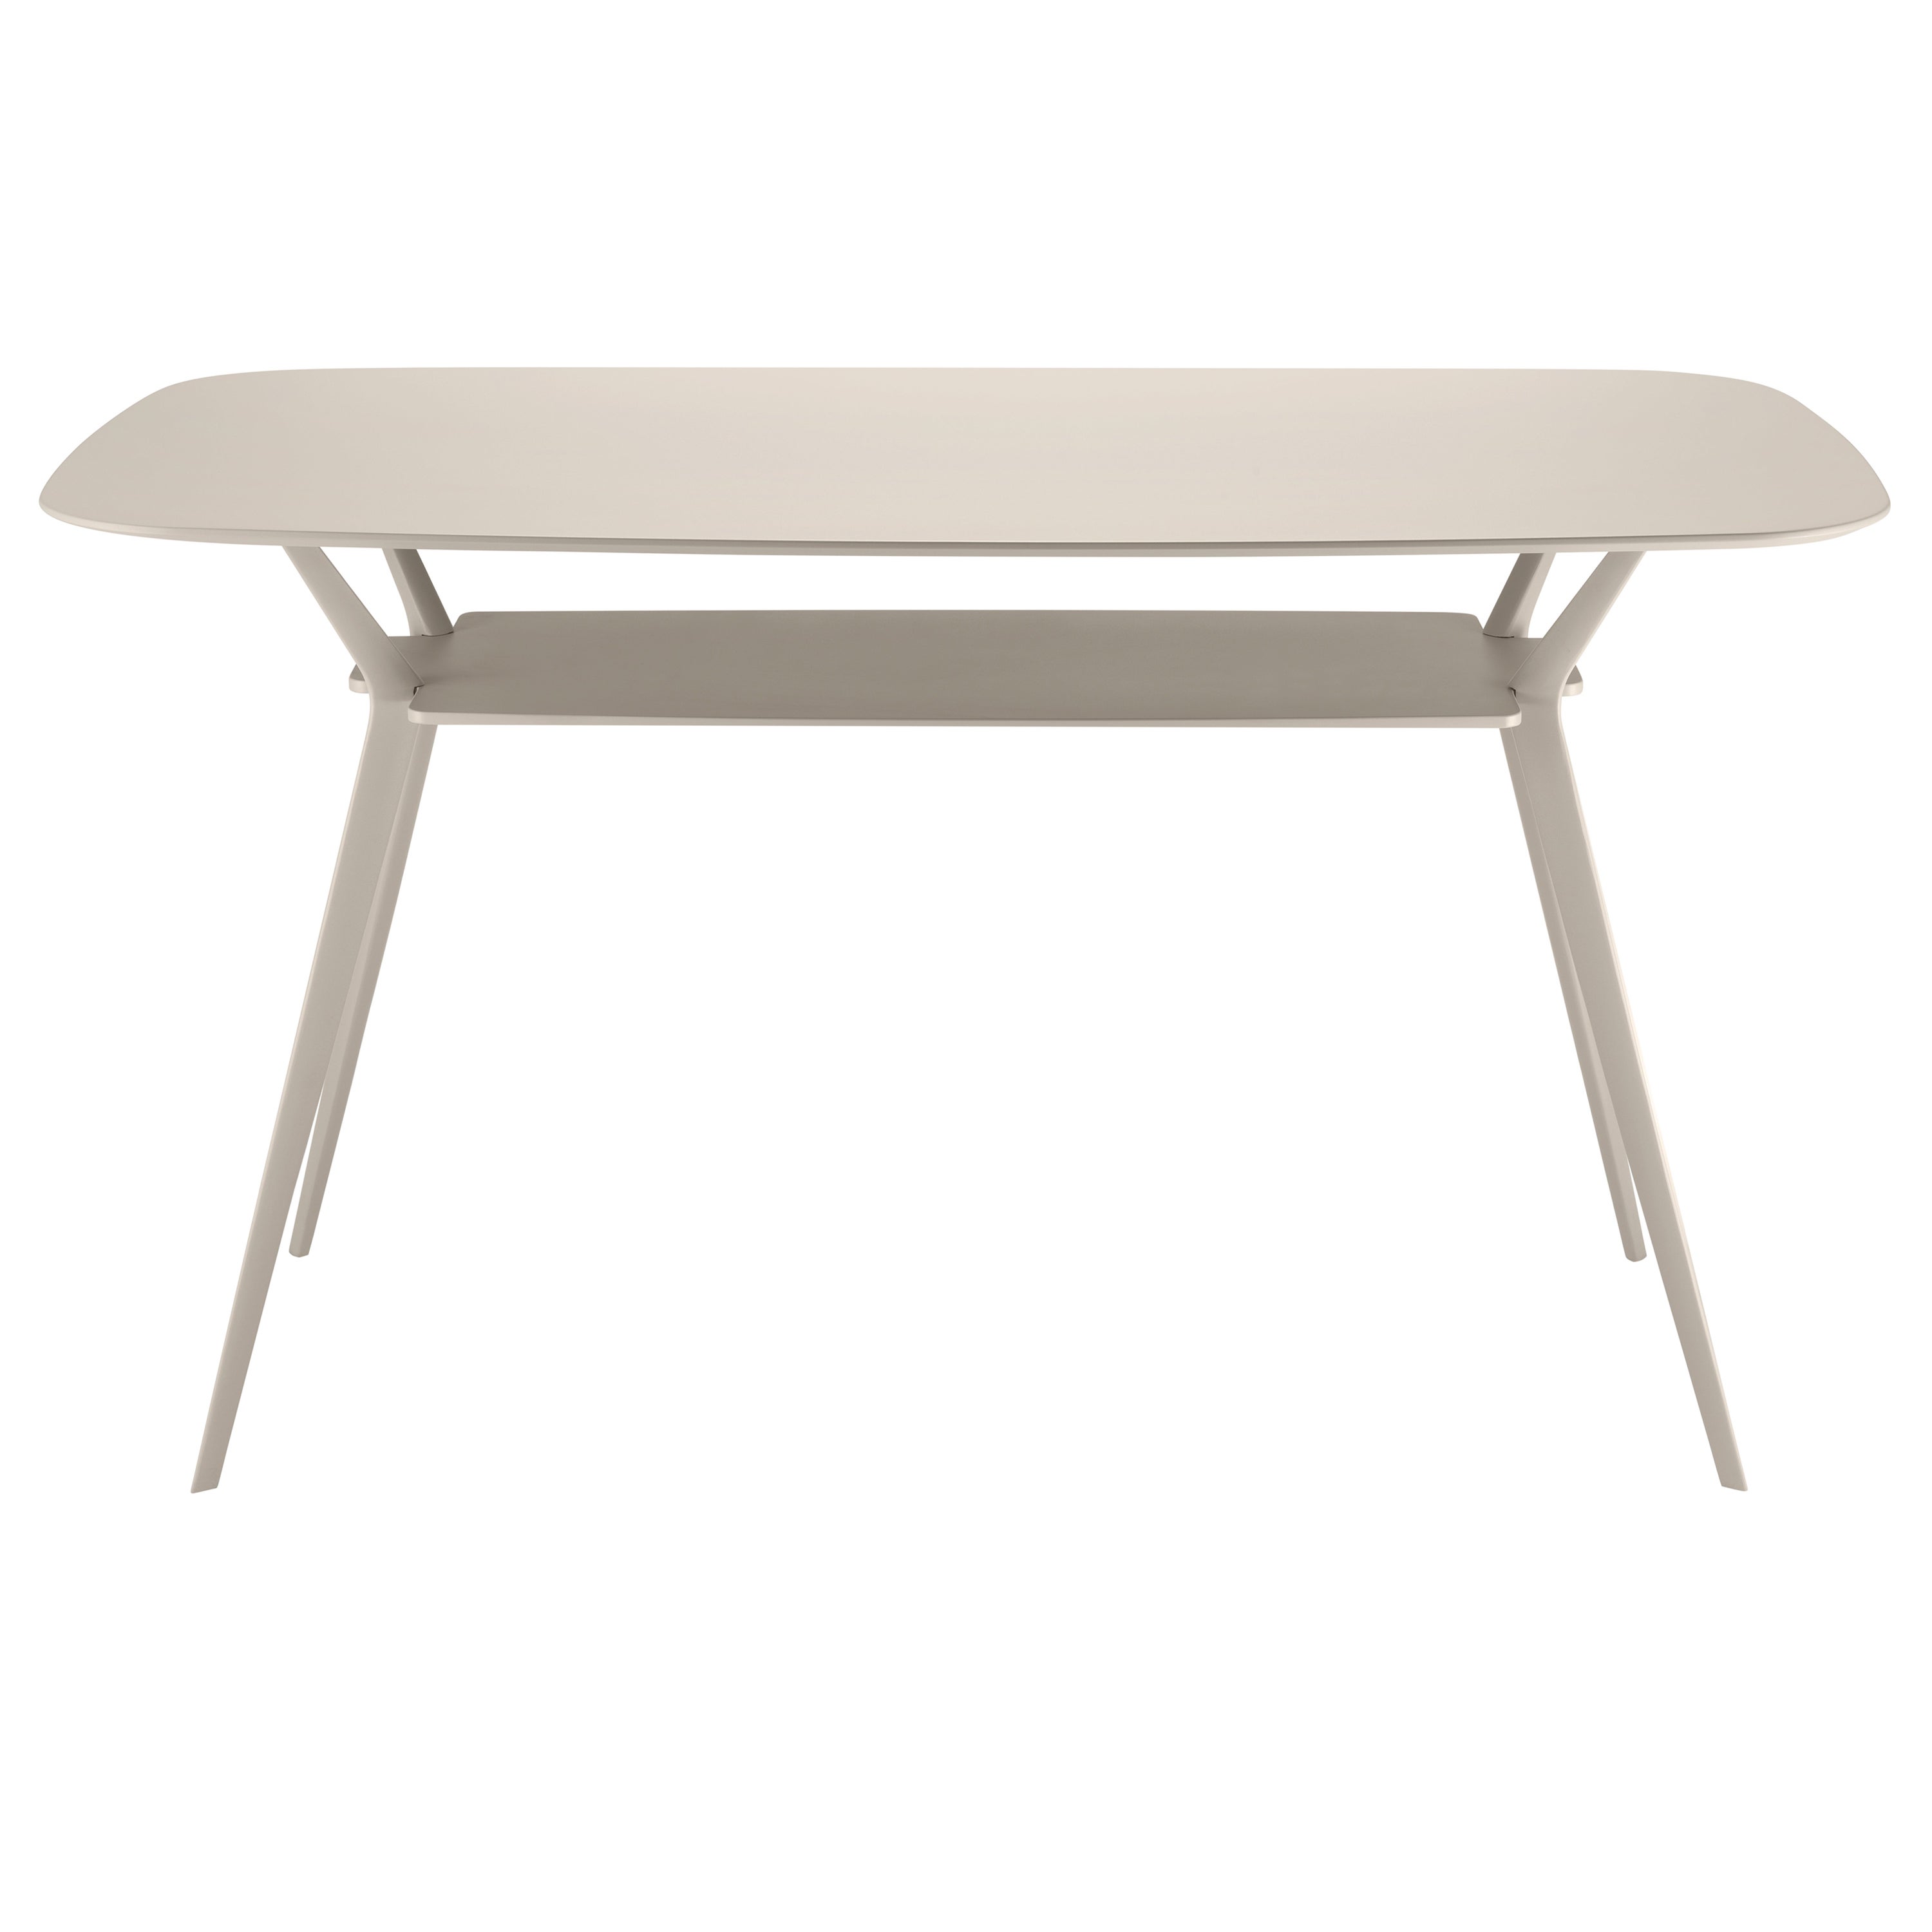 Alias Biplane 487 High Table in Sand MDF Top and Sand Polished Aluminium Frame